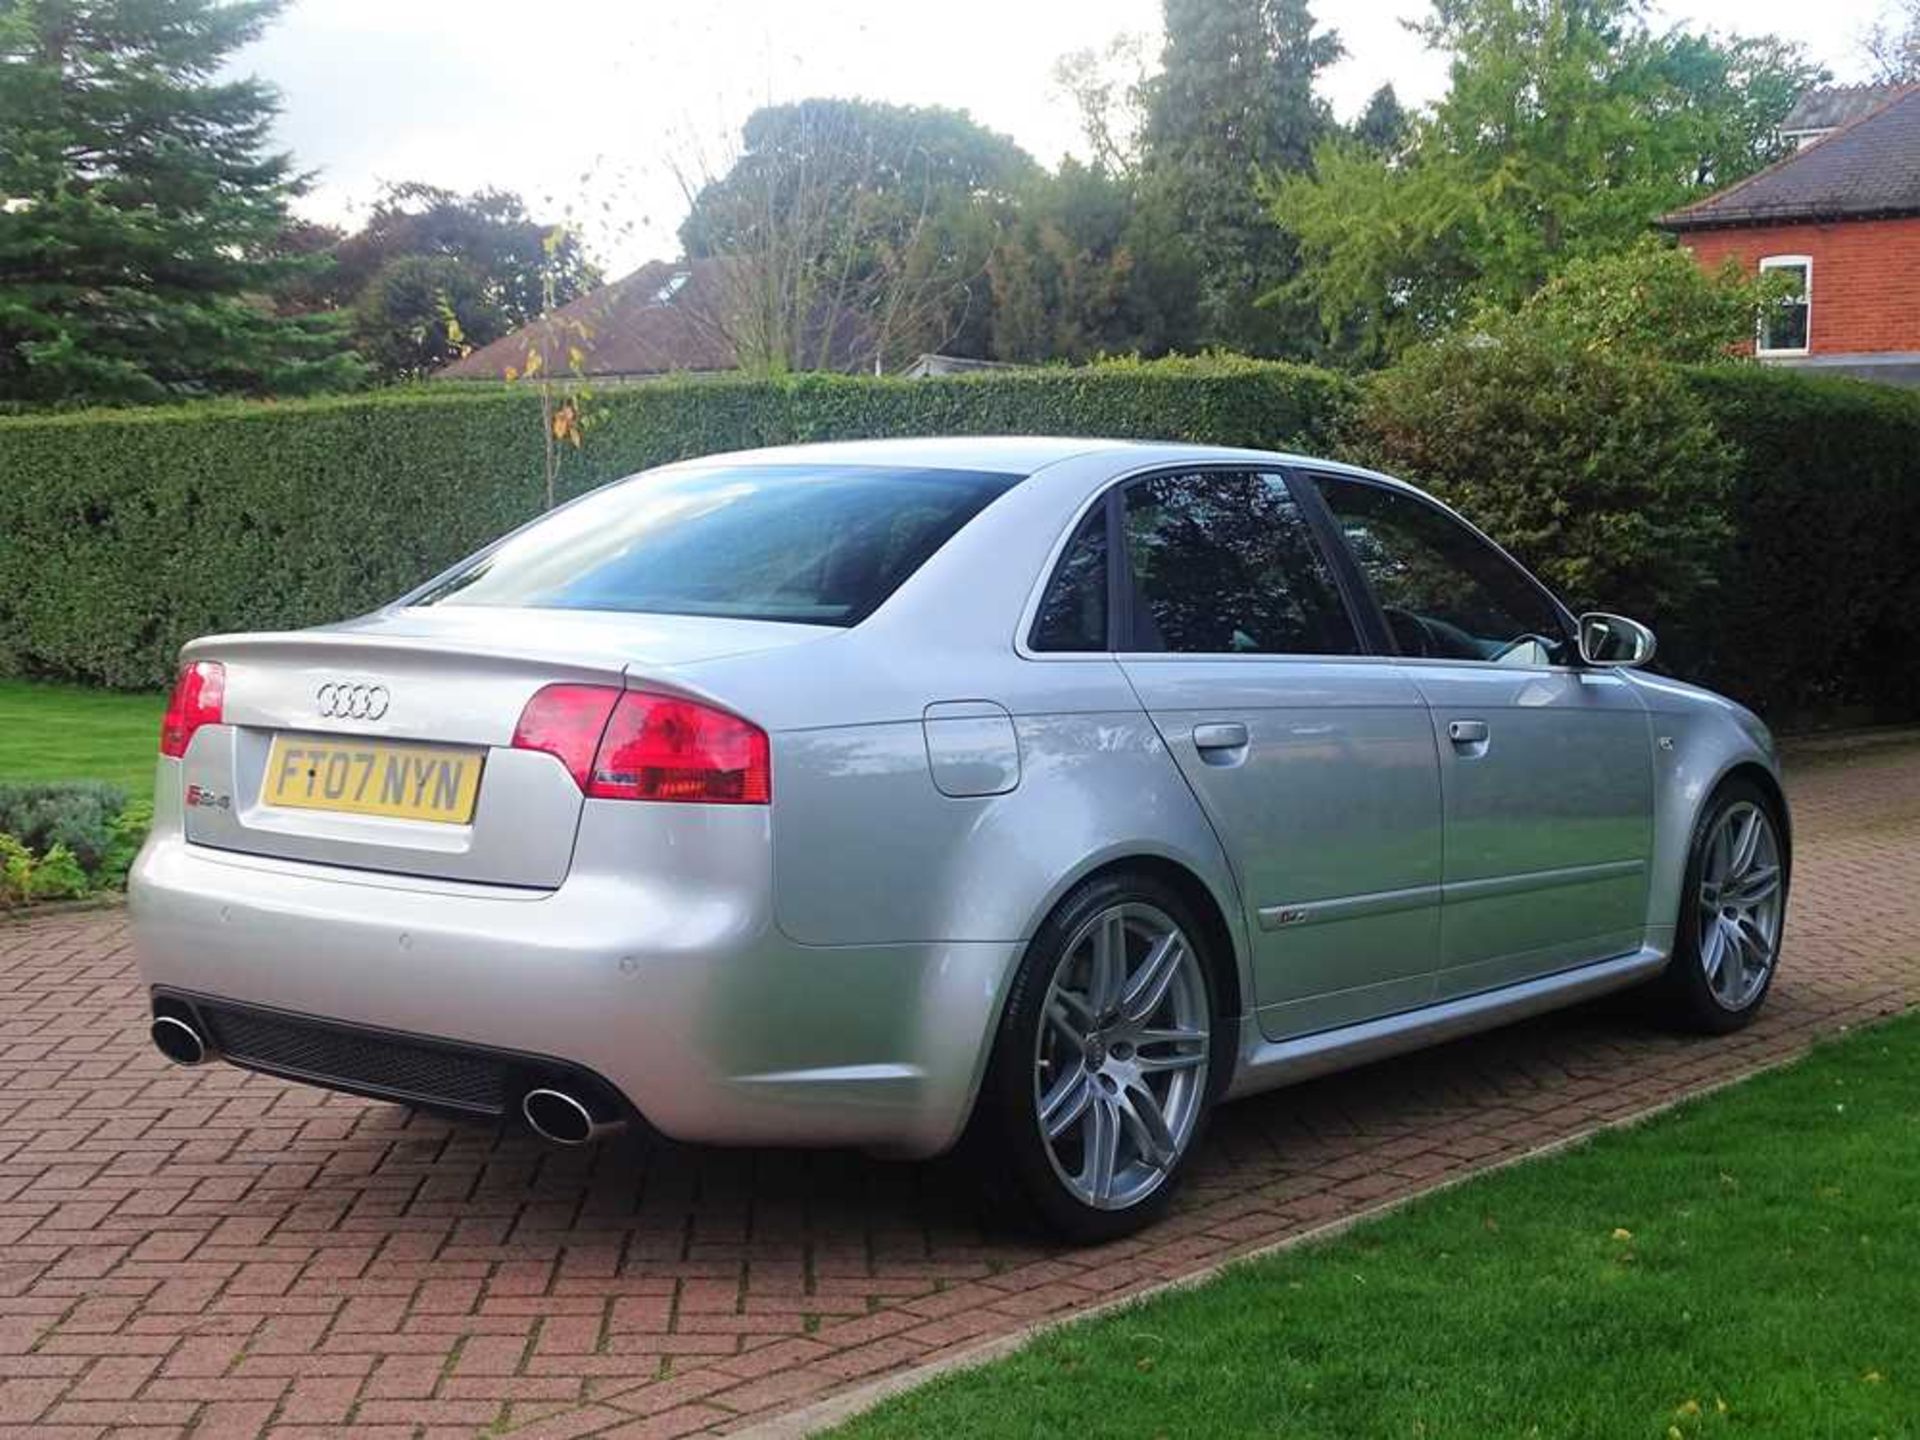 2007 Audi RS4 Saloon One owner and just c.60,000 miles from new - Image 80 of 86